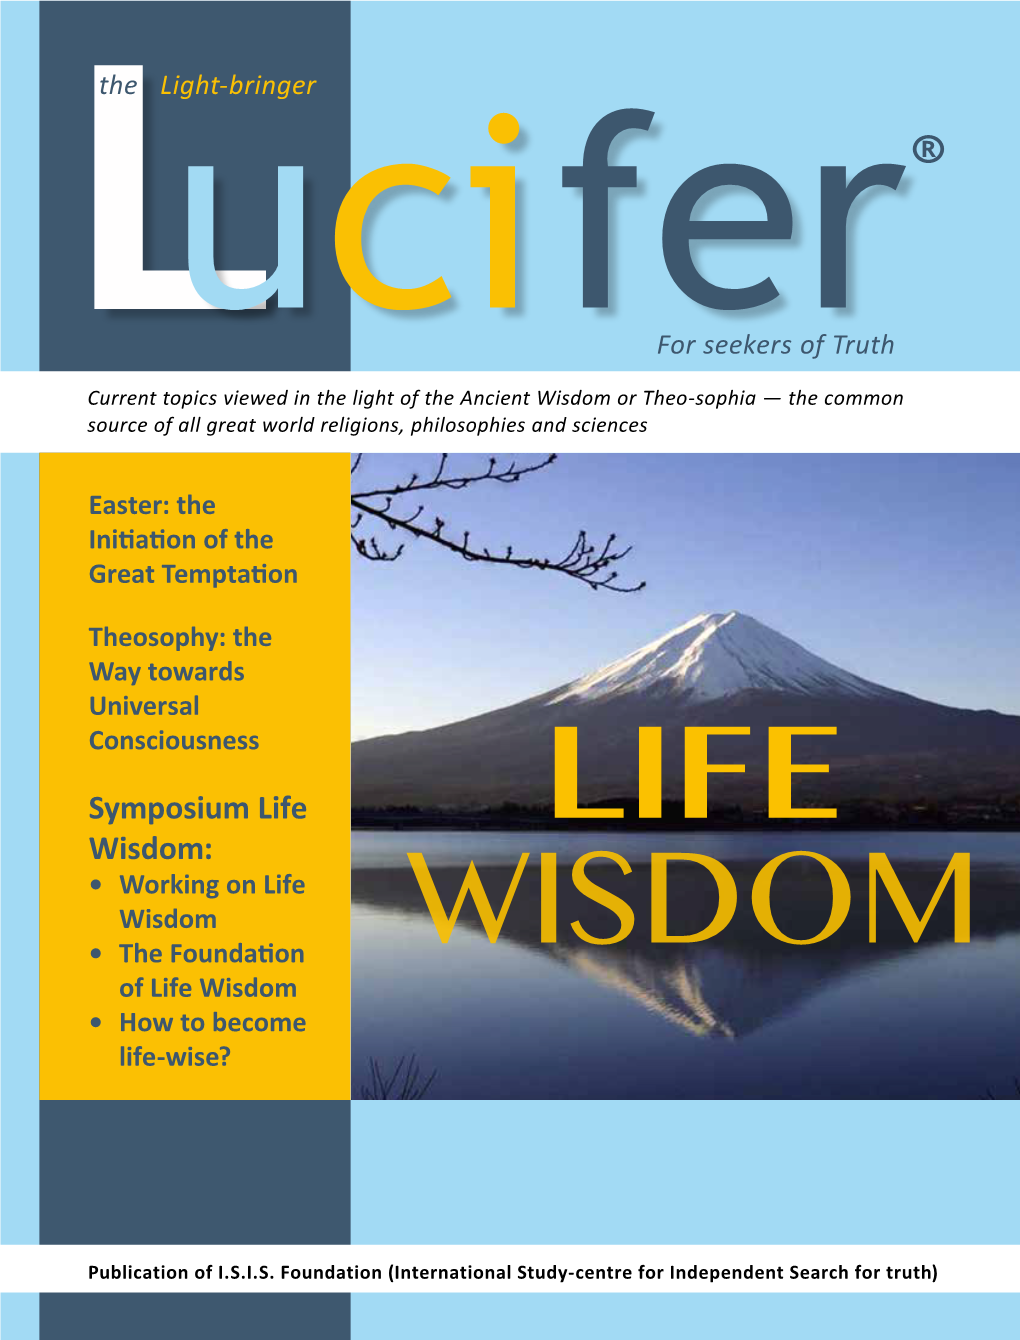 Symposium Life Wisdom: Working on Life Wisdom Easter: the Initiation of the Great P